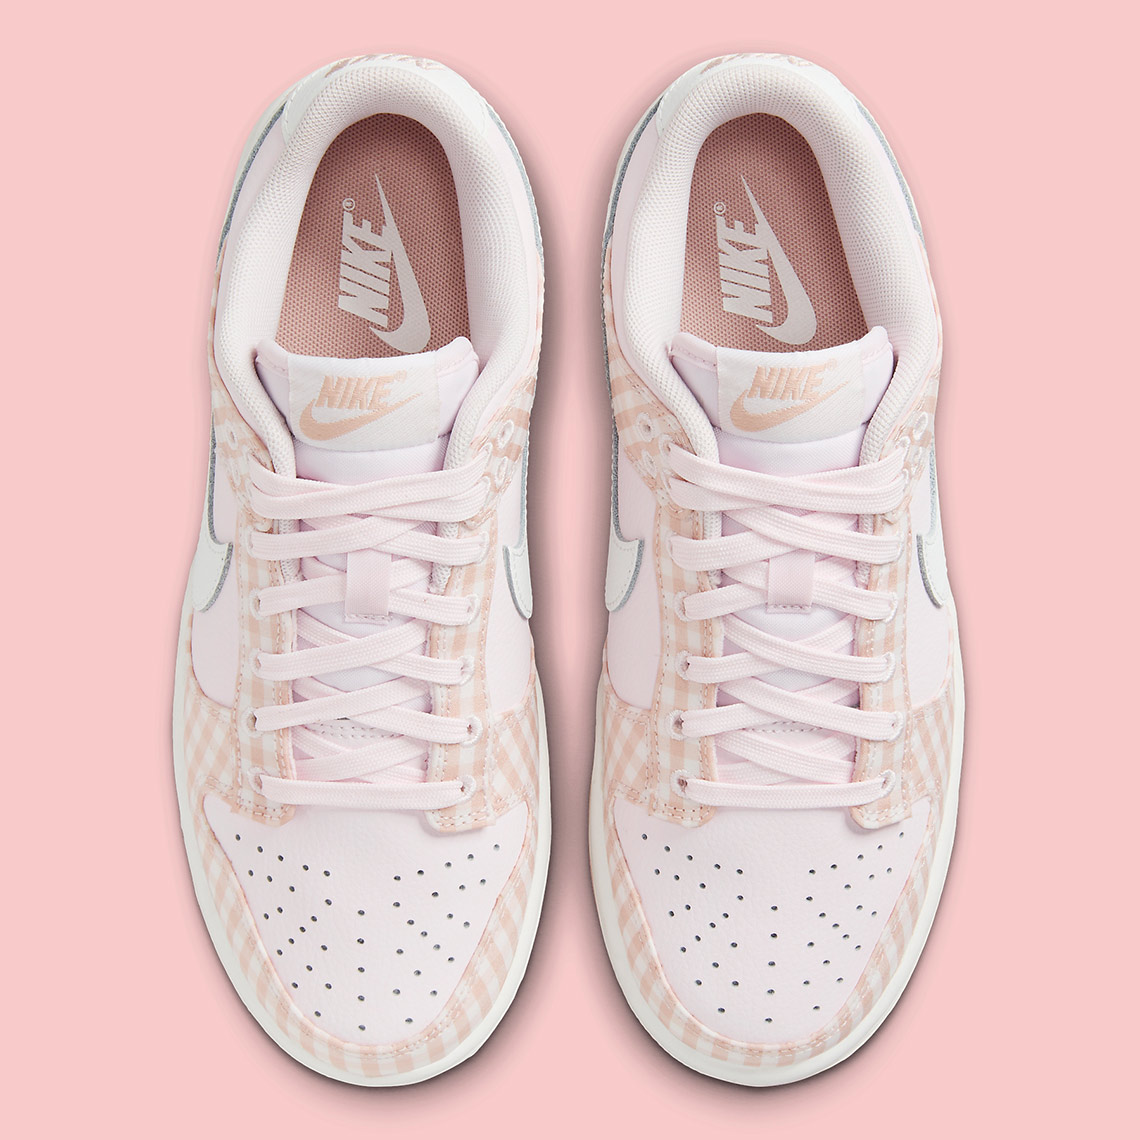 pink and white nike dunks sneakers clearance Pink Gingham Plaid Fb9881 600 4